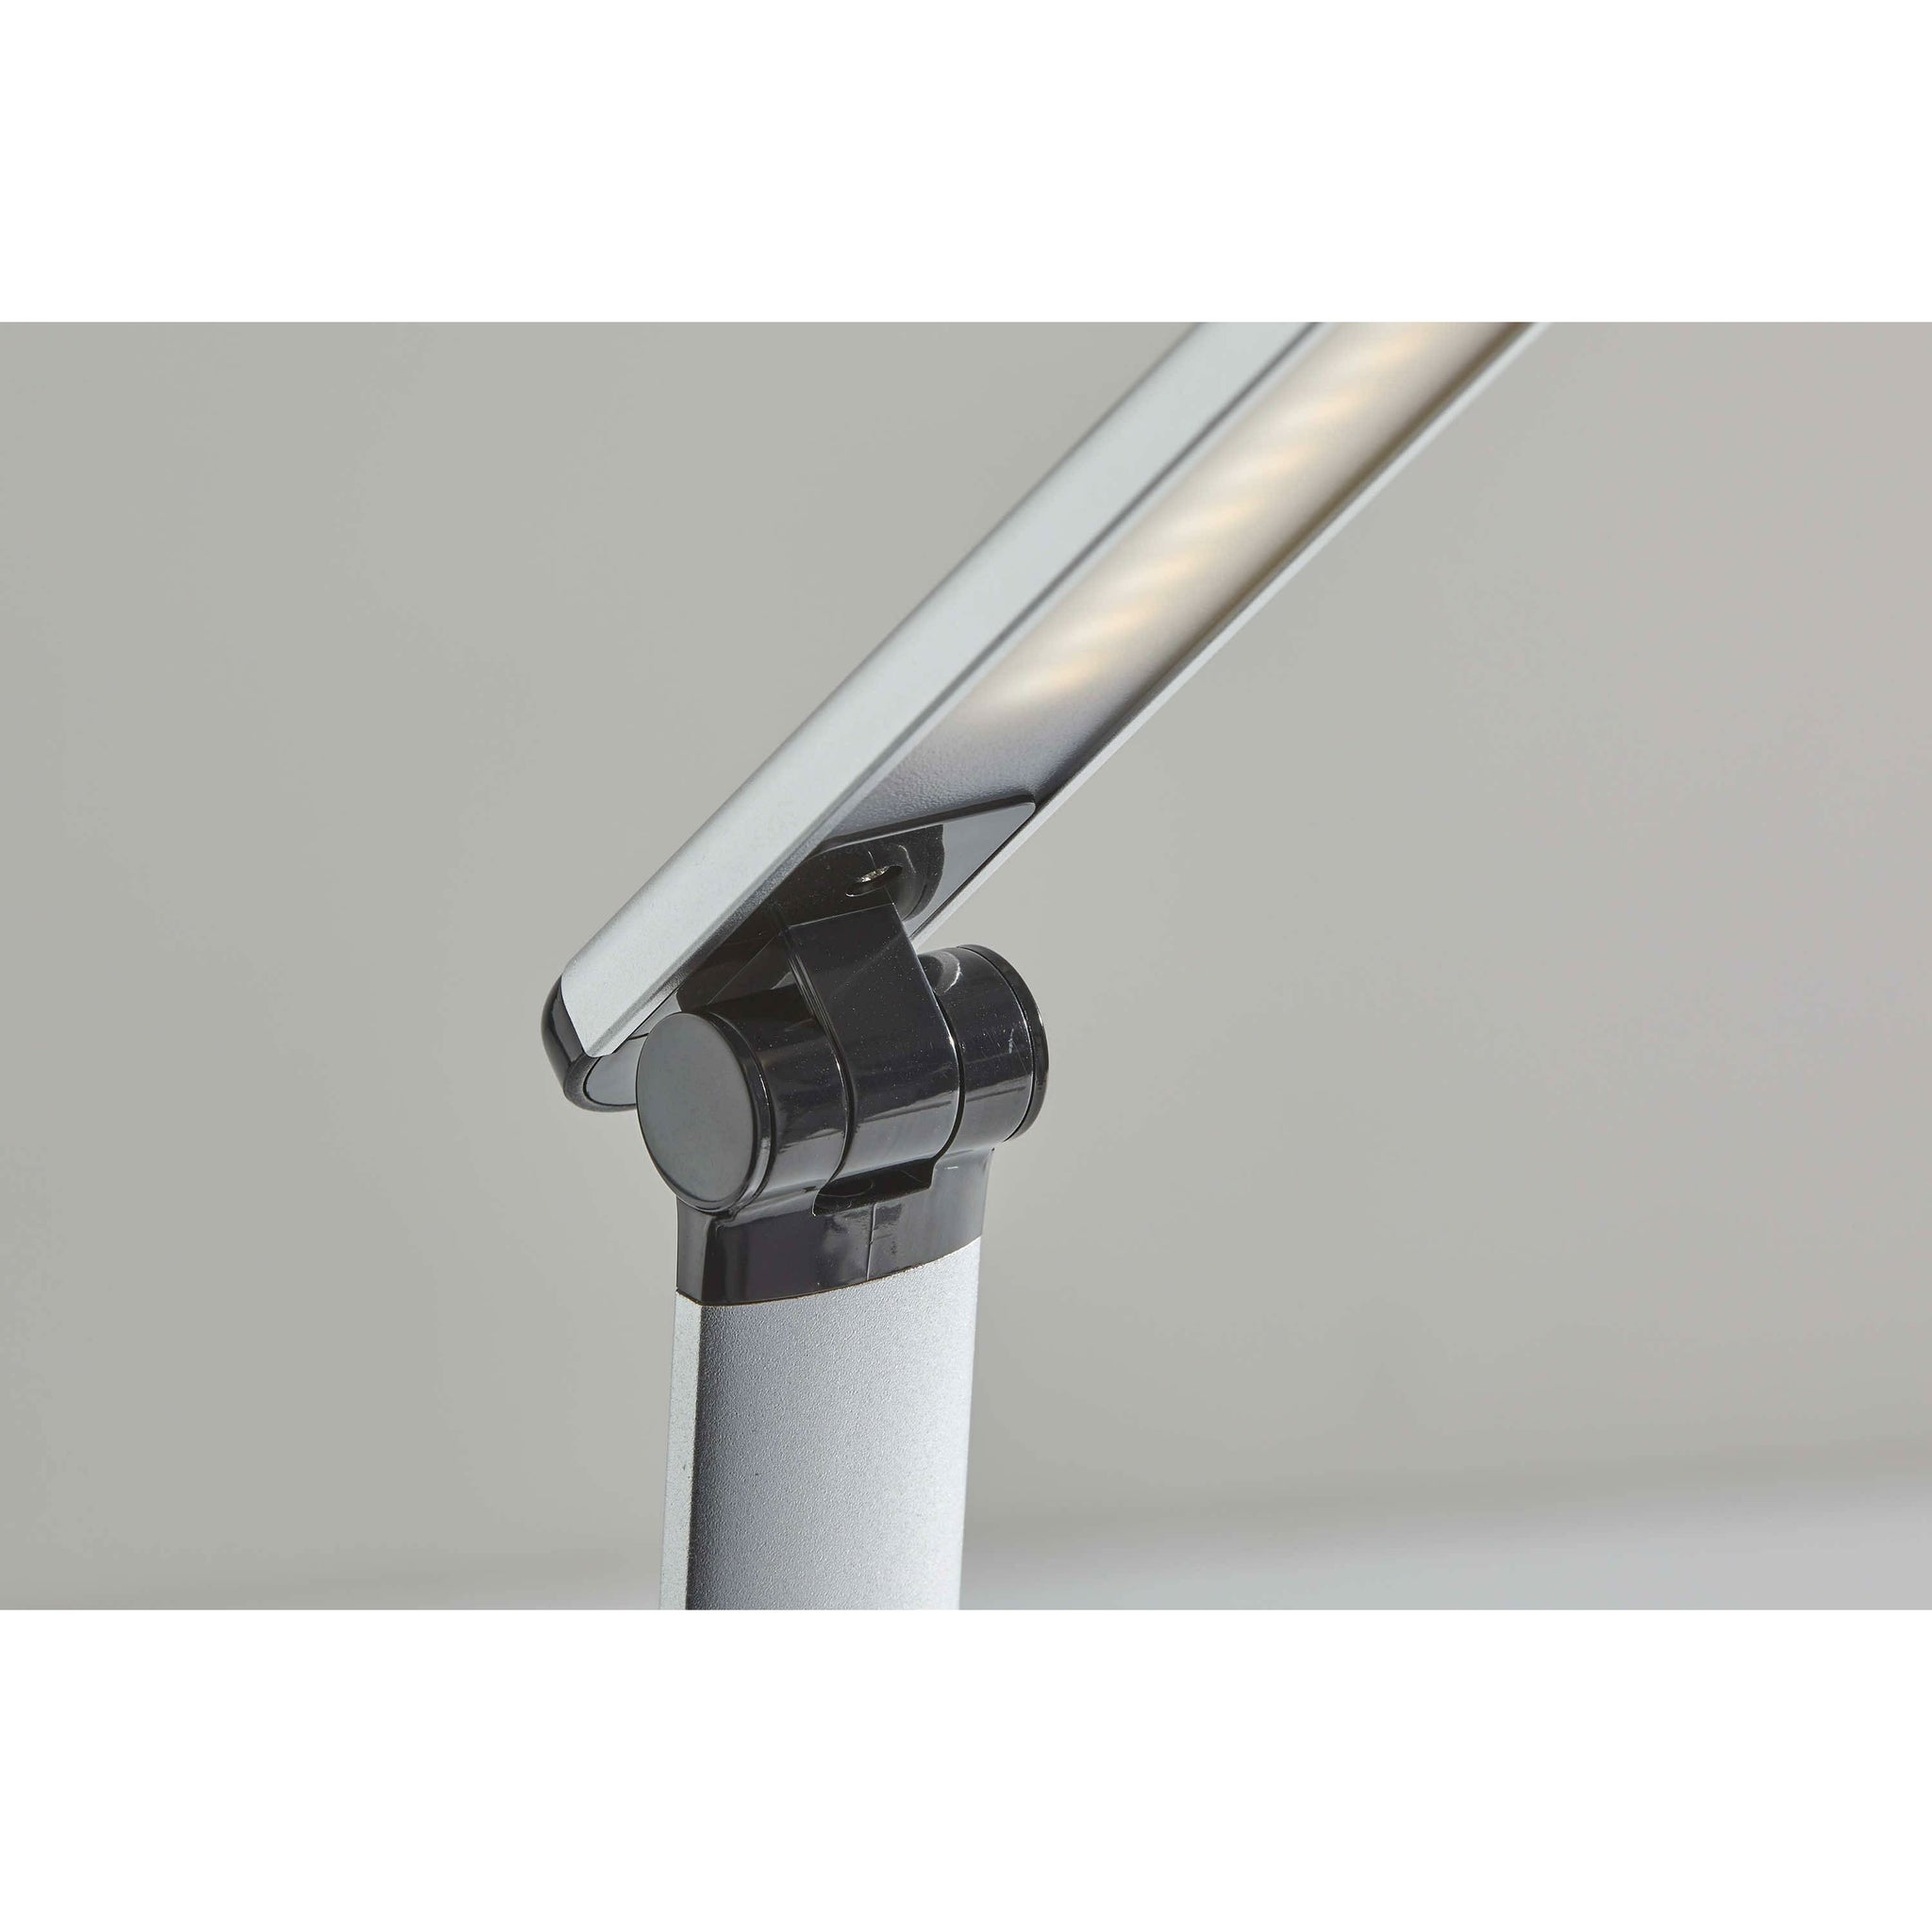 Lennox Collection Task Lamp Matte Silver & Glossy Black